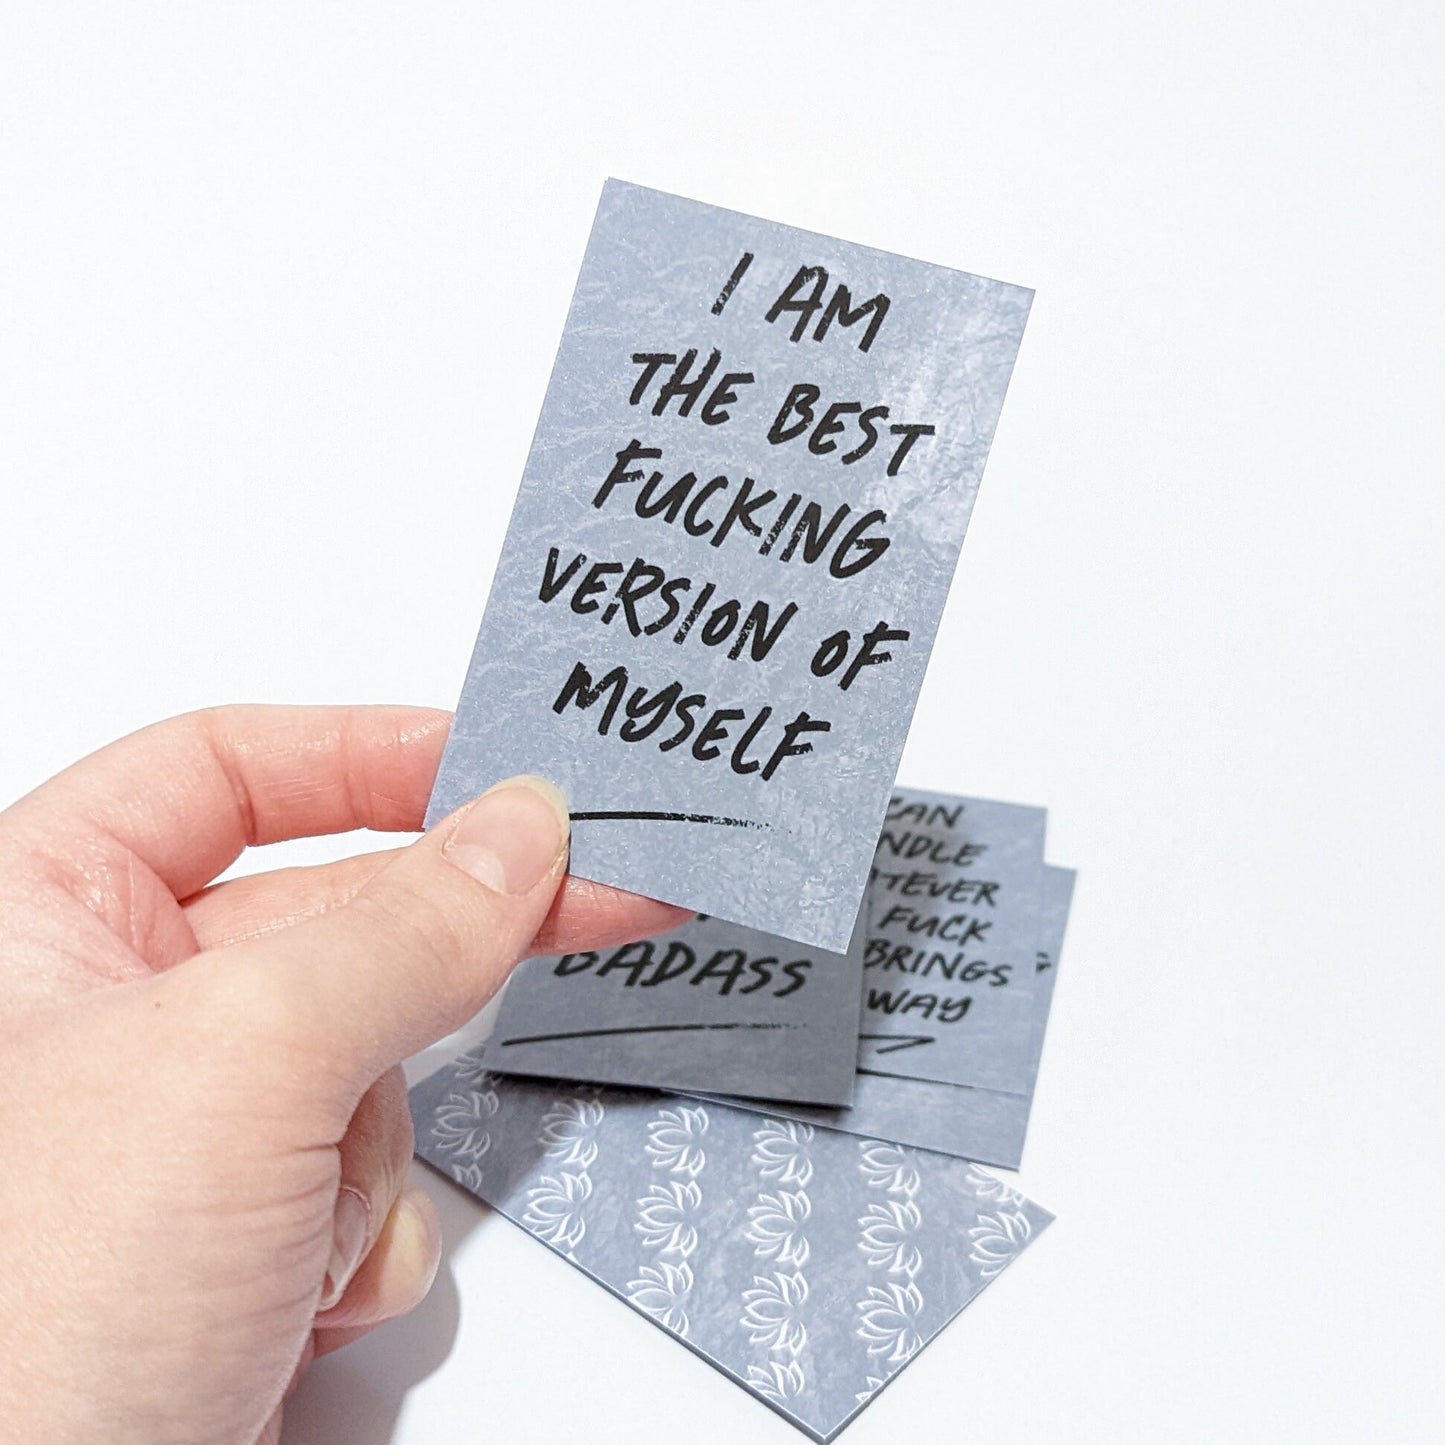 The Sweary Affirmation Shop - Custom Sweary Affirmation Deck | Mindful Daily Affirmation Cards | Funny Affirmations for Gifting